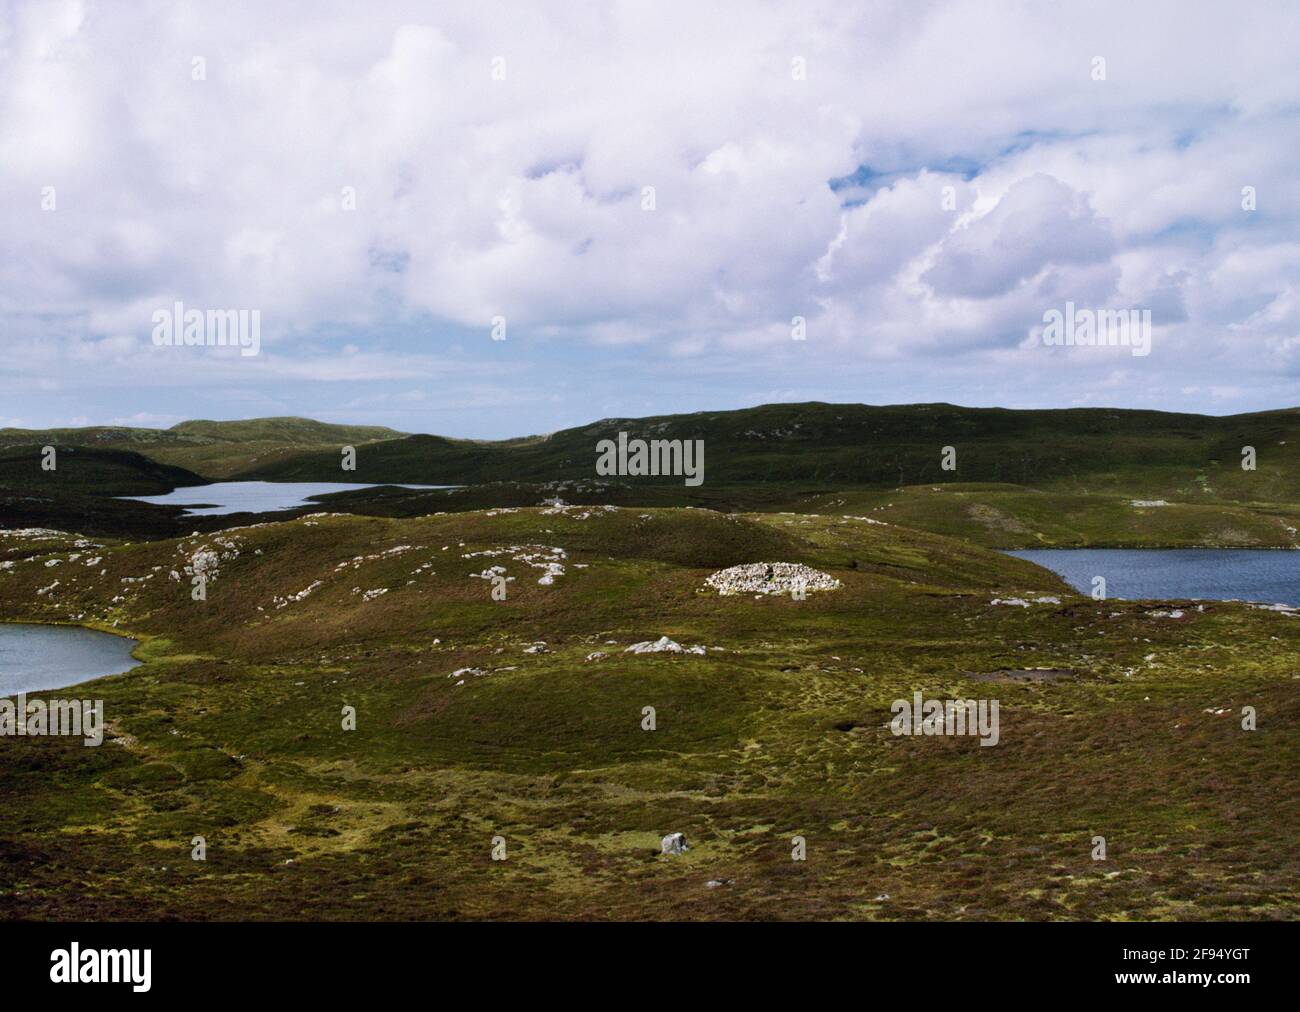 View NW showing Punds Water Neolithic heel-shaped chambered cairn situated on a rocky knoll between lochans on North Mainland, Shetland, Scotland, UK. Stock Photo